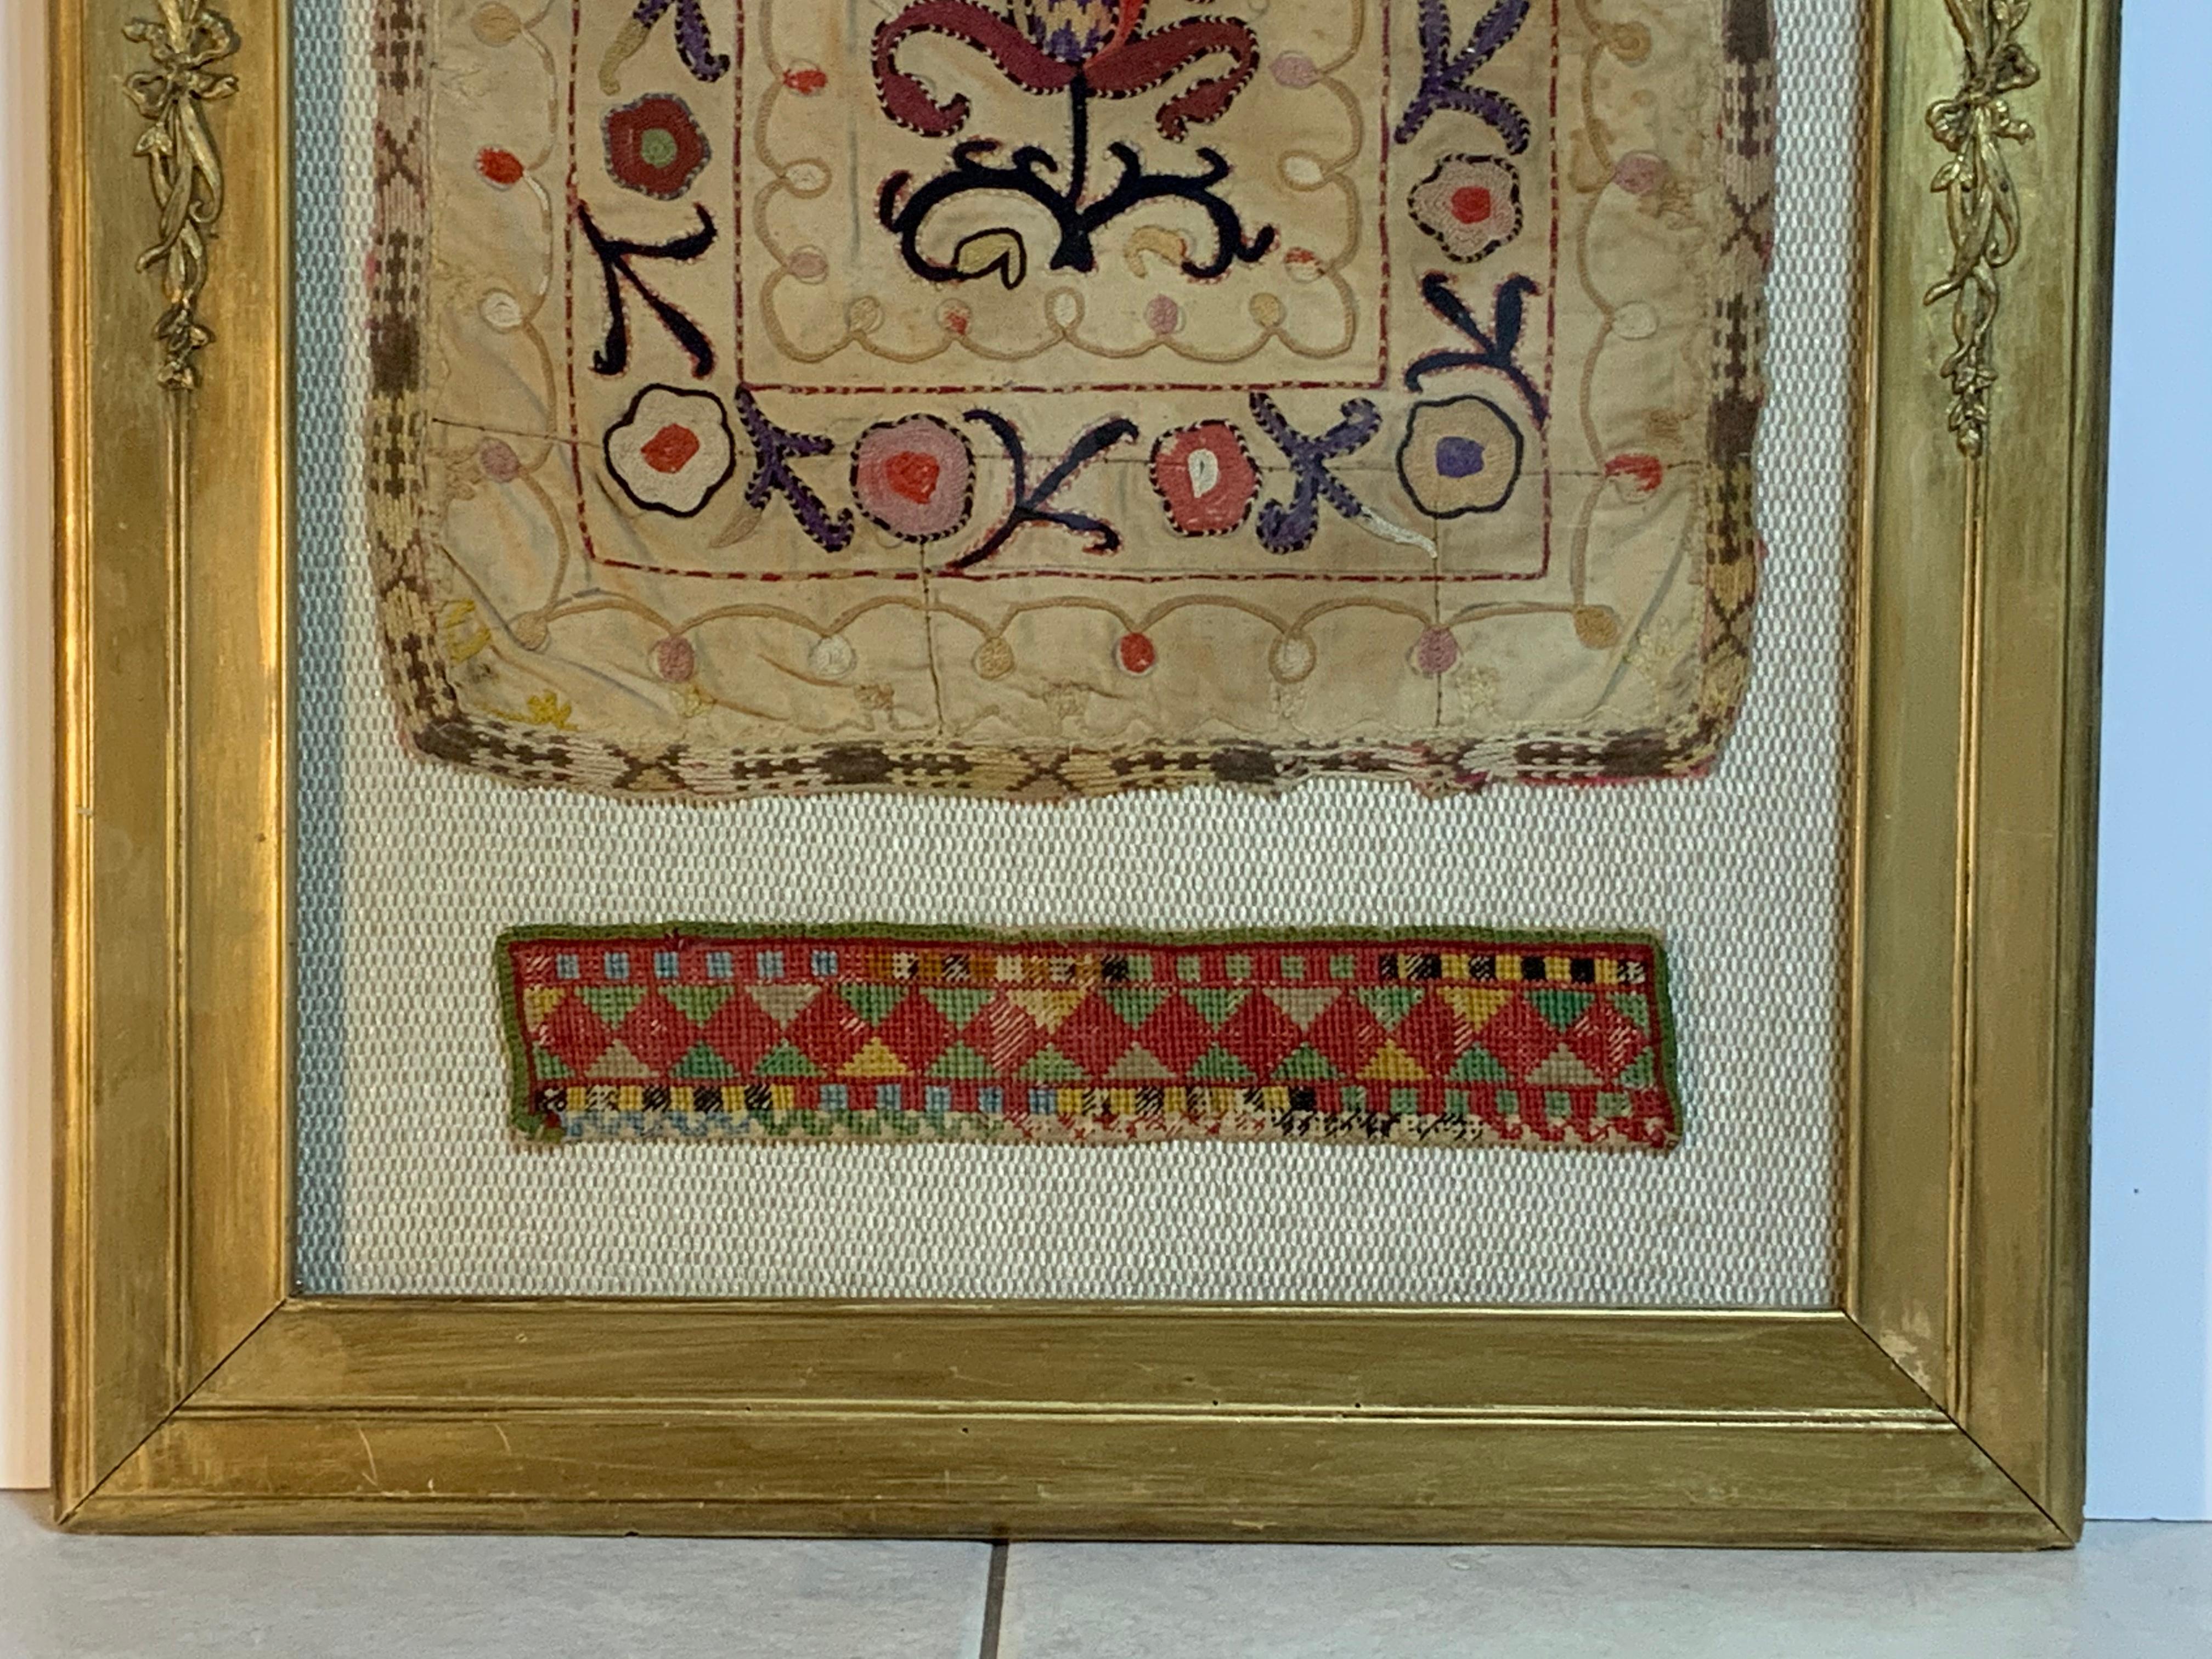 Antique Hand Embroidered Turkmen Suzani Sampler In Shadow Box In Good Condition For Sale In Delray Beach, FL